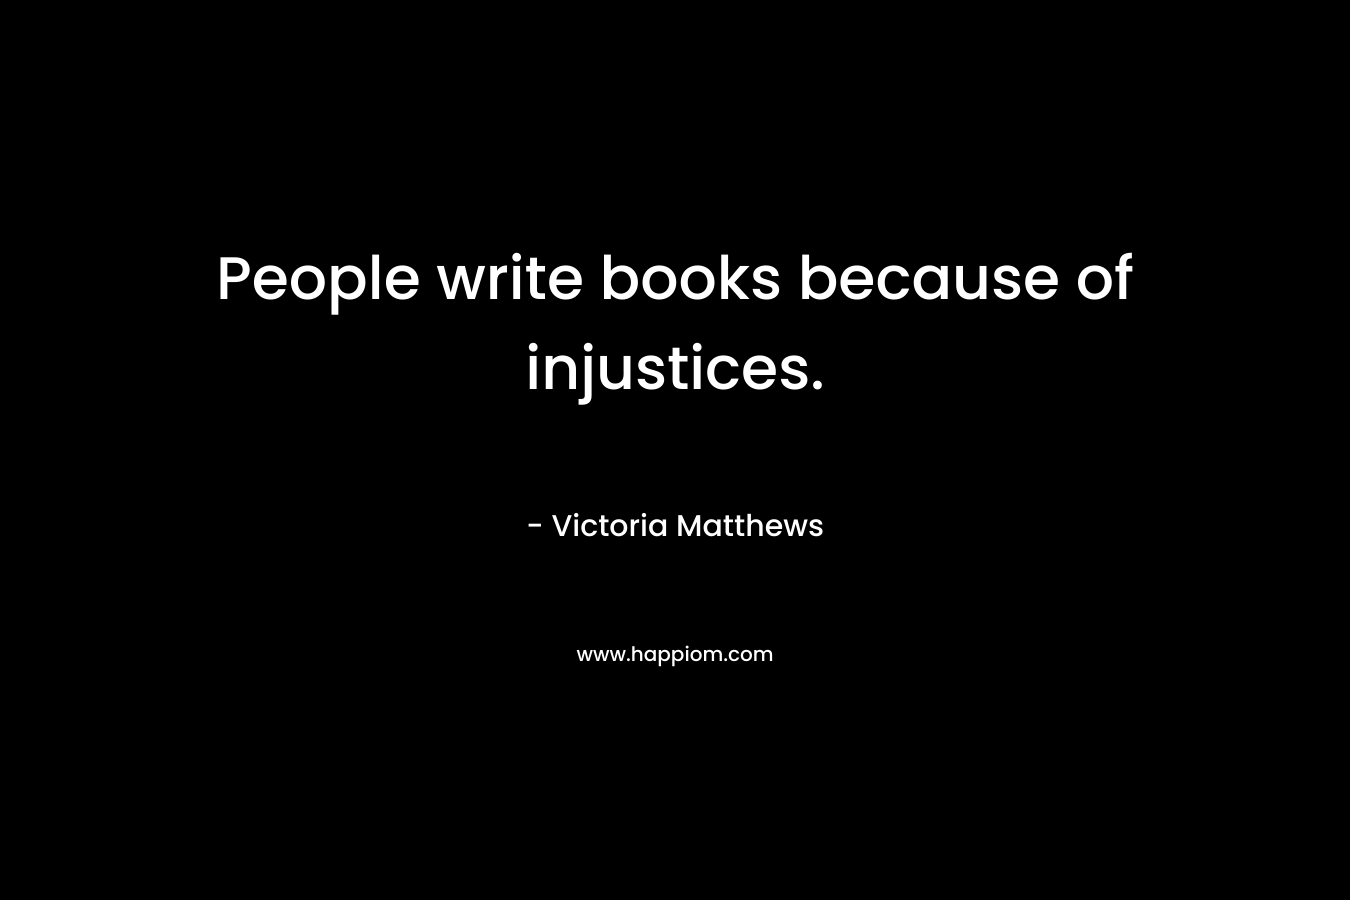 People write books because of injustices.